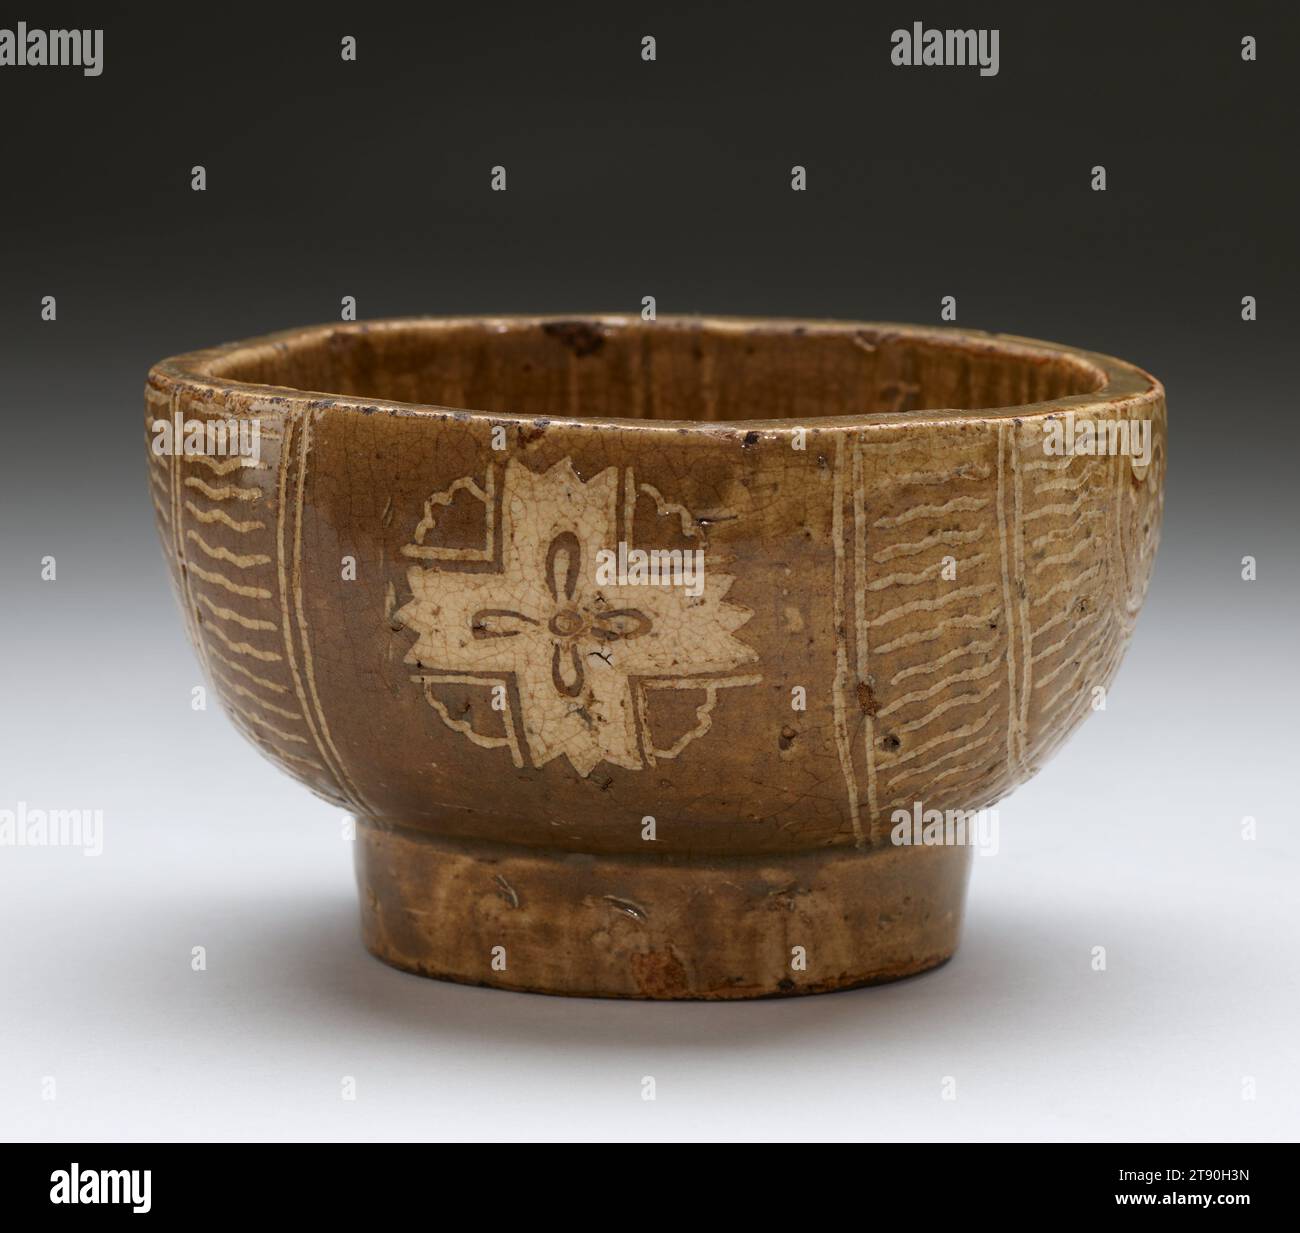 https://c8.alamy.com/comp/2T90H3N/bowl-with-cross-design-17th-century-unknown-japanese-3-916-5-78-5-14-in-905-1492-1334-cm-hagi-ware-glazed-stoneware-japan-17th-century-the-first-christian-missionaries-namely-portuguese-catholics-arrived-in-japan-in-the-late-1540s-and-achieved-success-converting-christians-in-some-areas-of-the-country-christians-were-persecuted-by-authority-of-japans-military-leaders-on-and-off-through-the-1630s-by-which-time-all-adherents-of-christianity-had-renounced-their-faith-or-moved-underground-stoneware-bowls-bearing-christian-crosses-began-to-be-made-2T90H3N.jpg